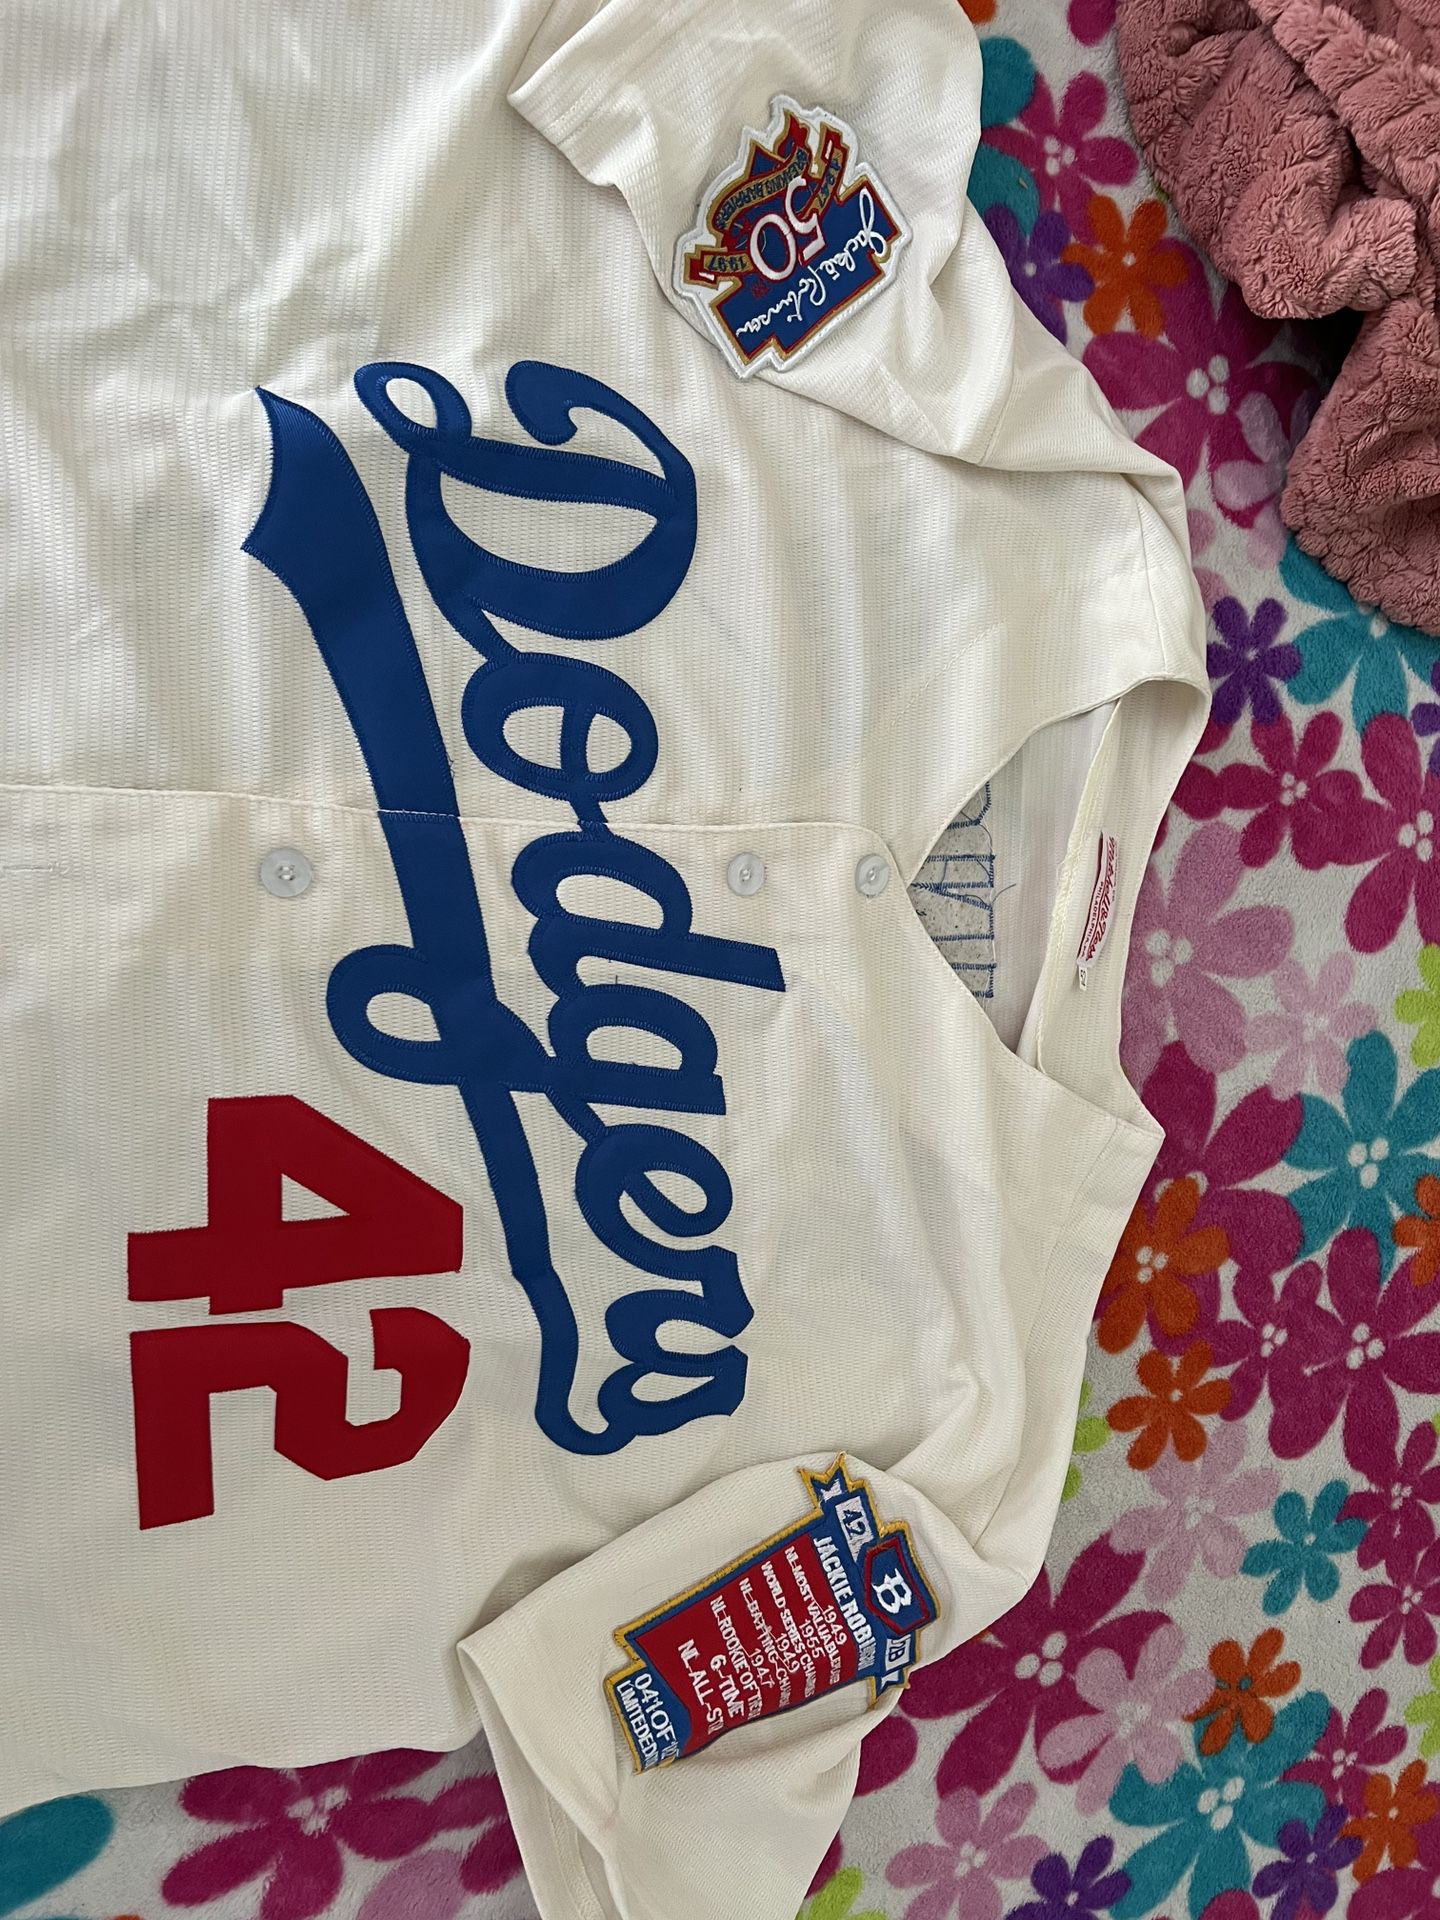 Jackie Robinson Jersey for Sale in North Las Vegas, NV - OfferUp